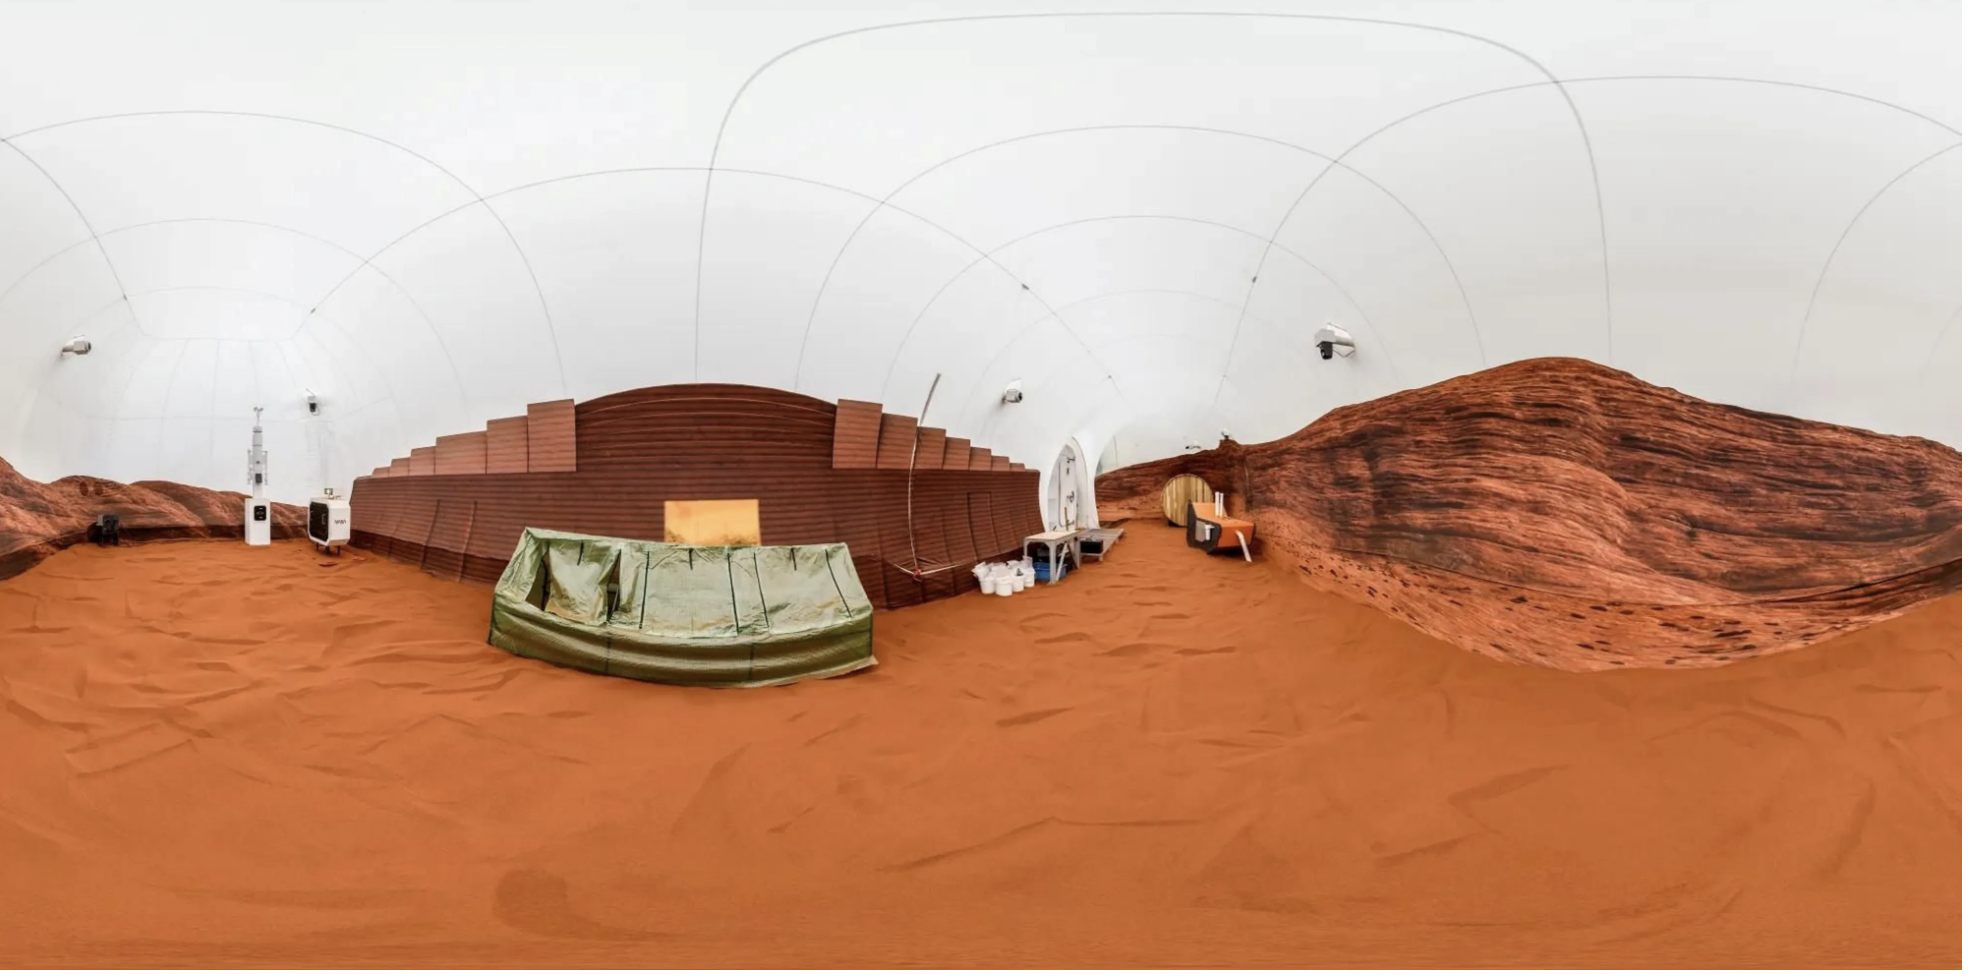 NASA is looking for volunteers to live in a Mars simulator for a year